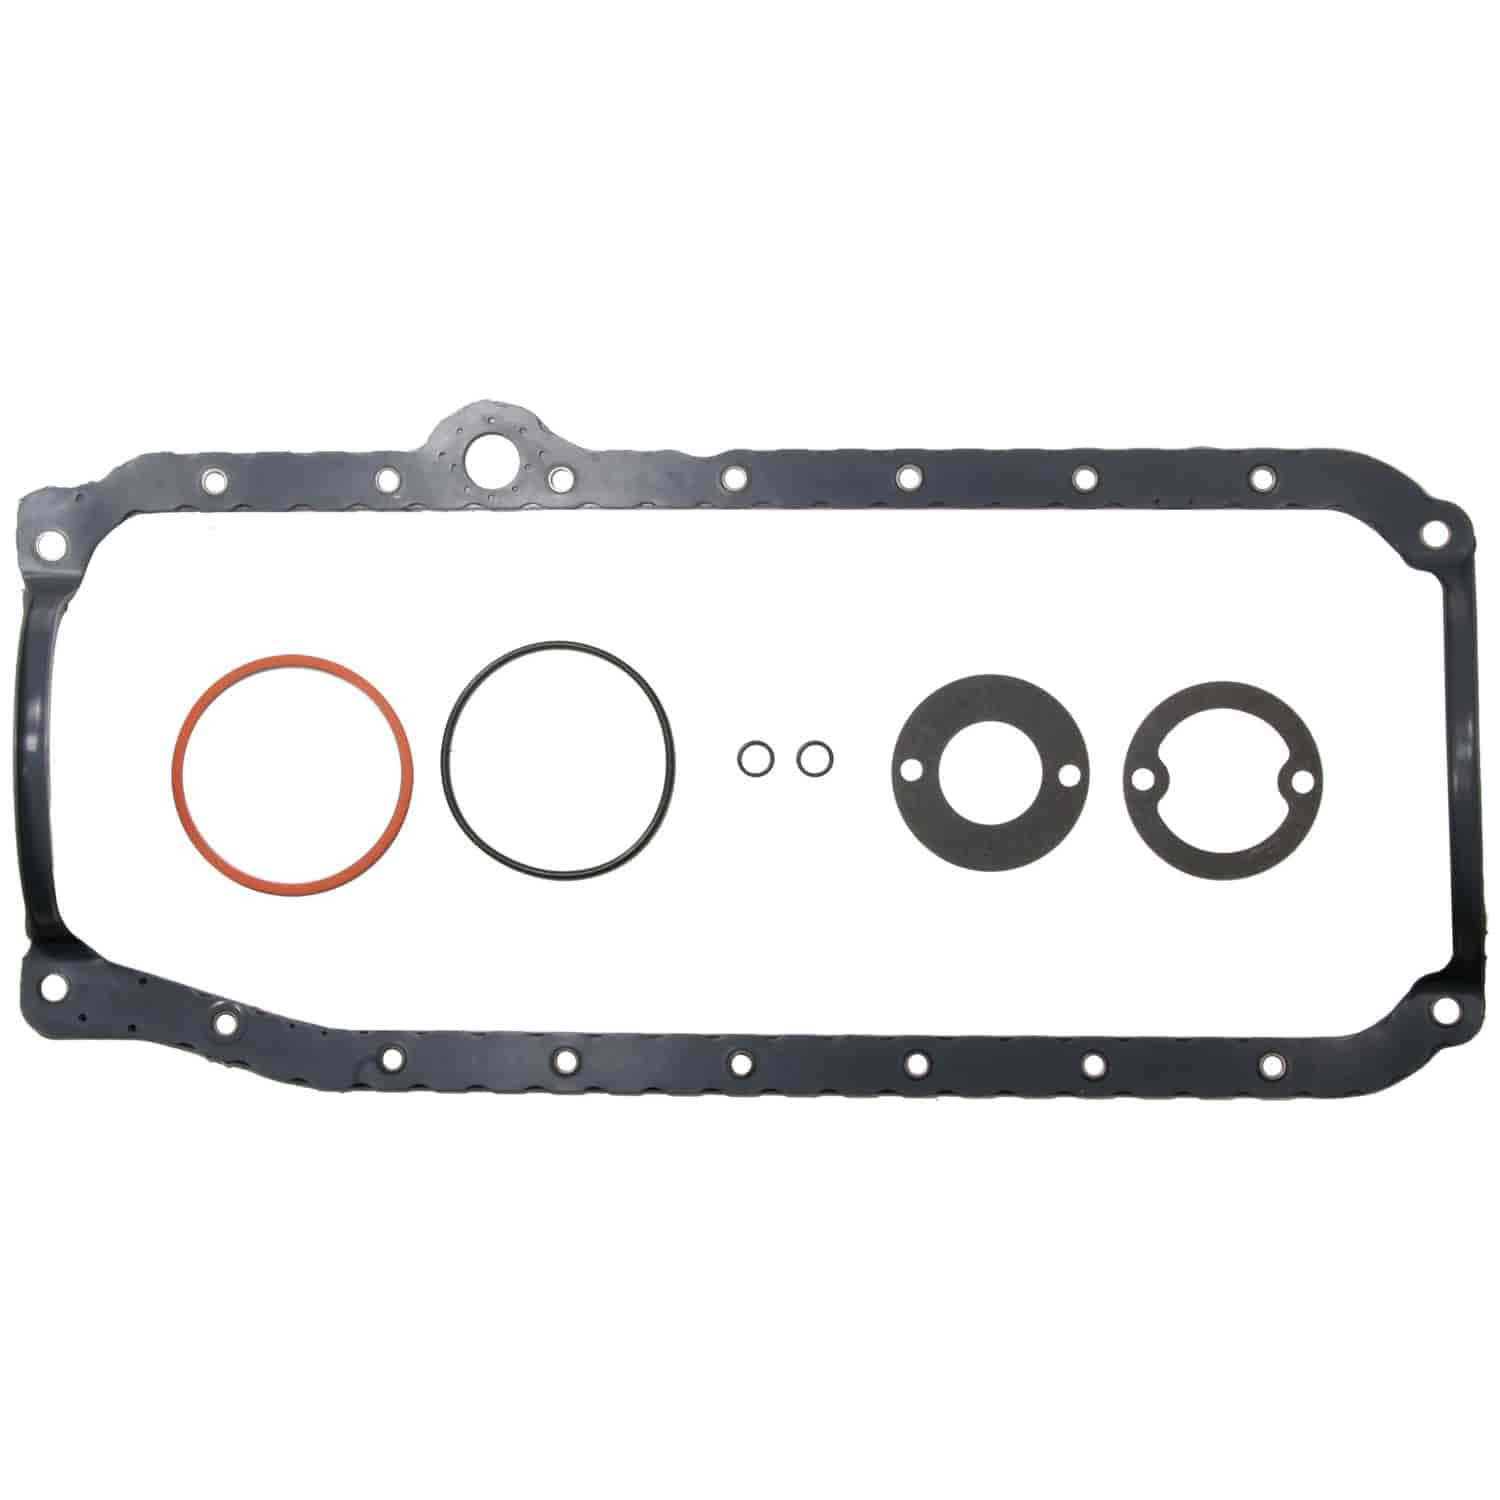 Oil Pan Gasket Set 1986-2002 Small Block Chevy 265/305/350 (4.3/5.0/5.7L) in Molded Rubber